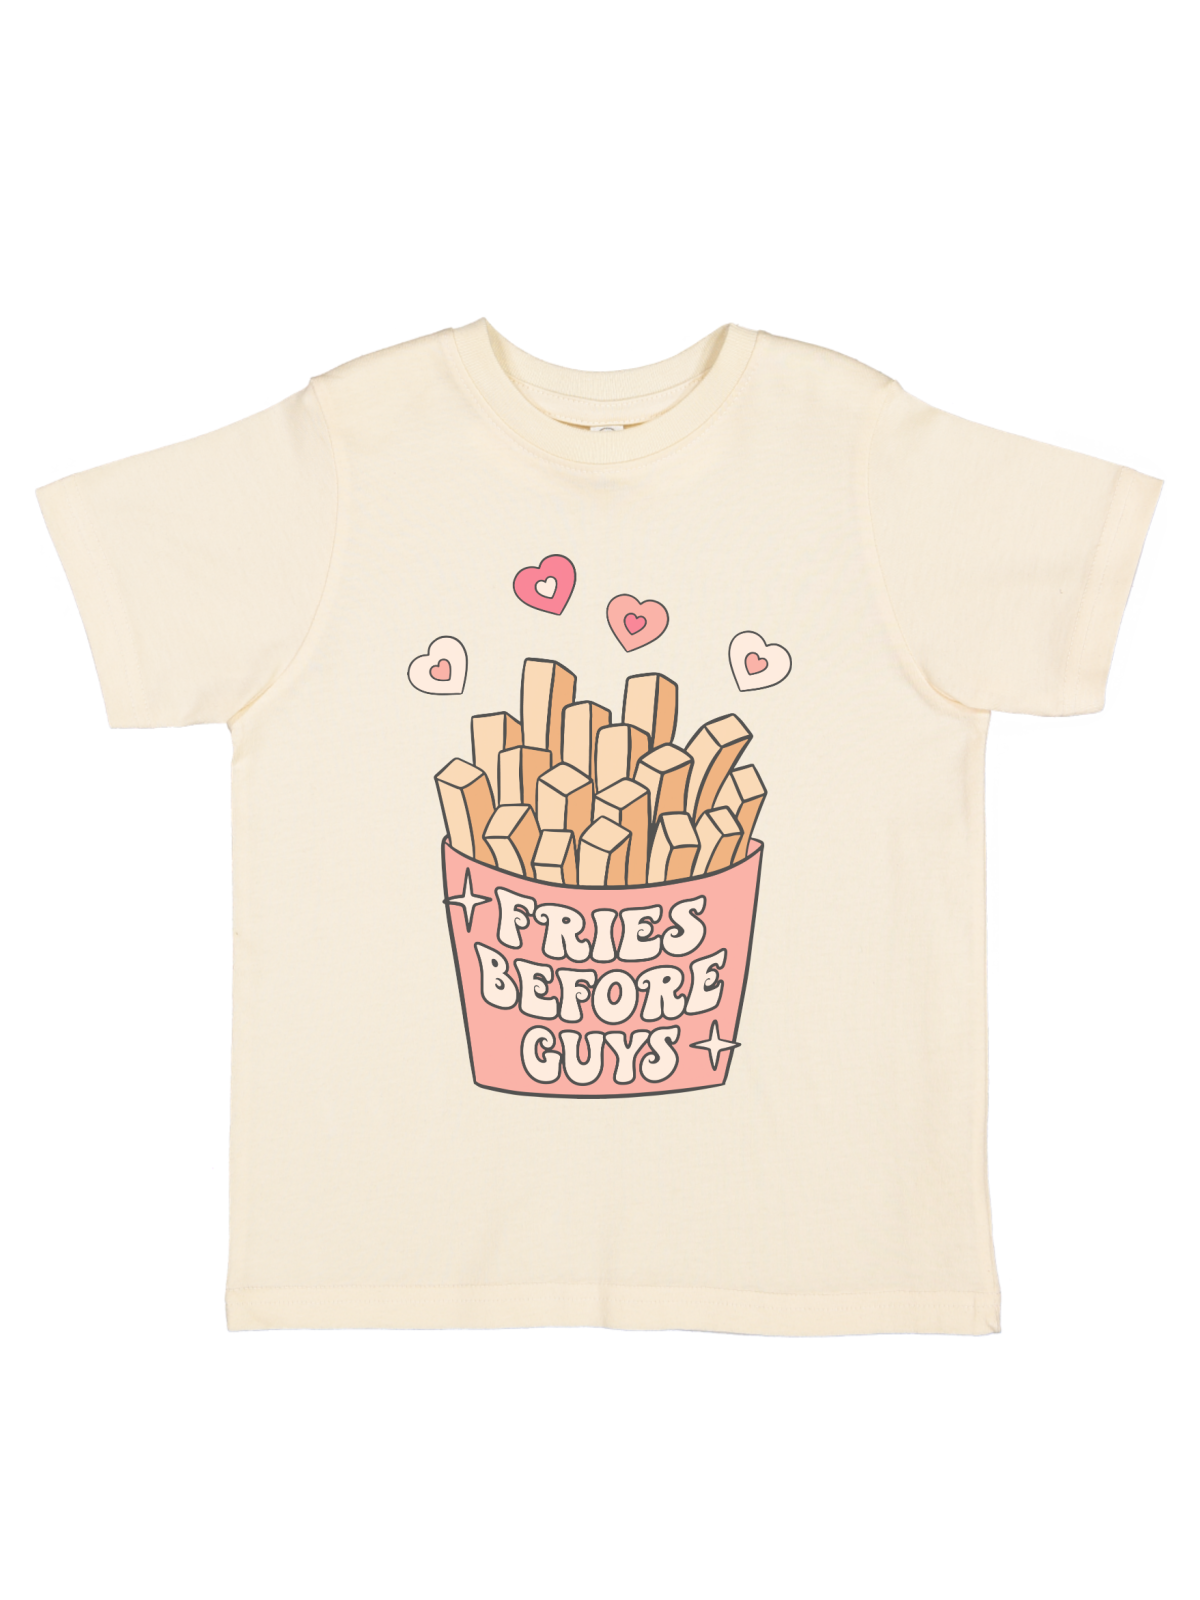 Fries before Guys Girls Valentine's Day Shirt in Natural Tan